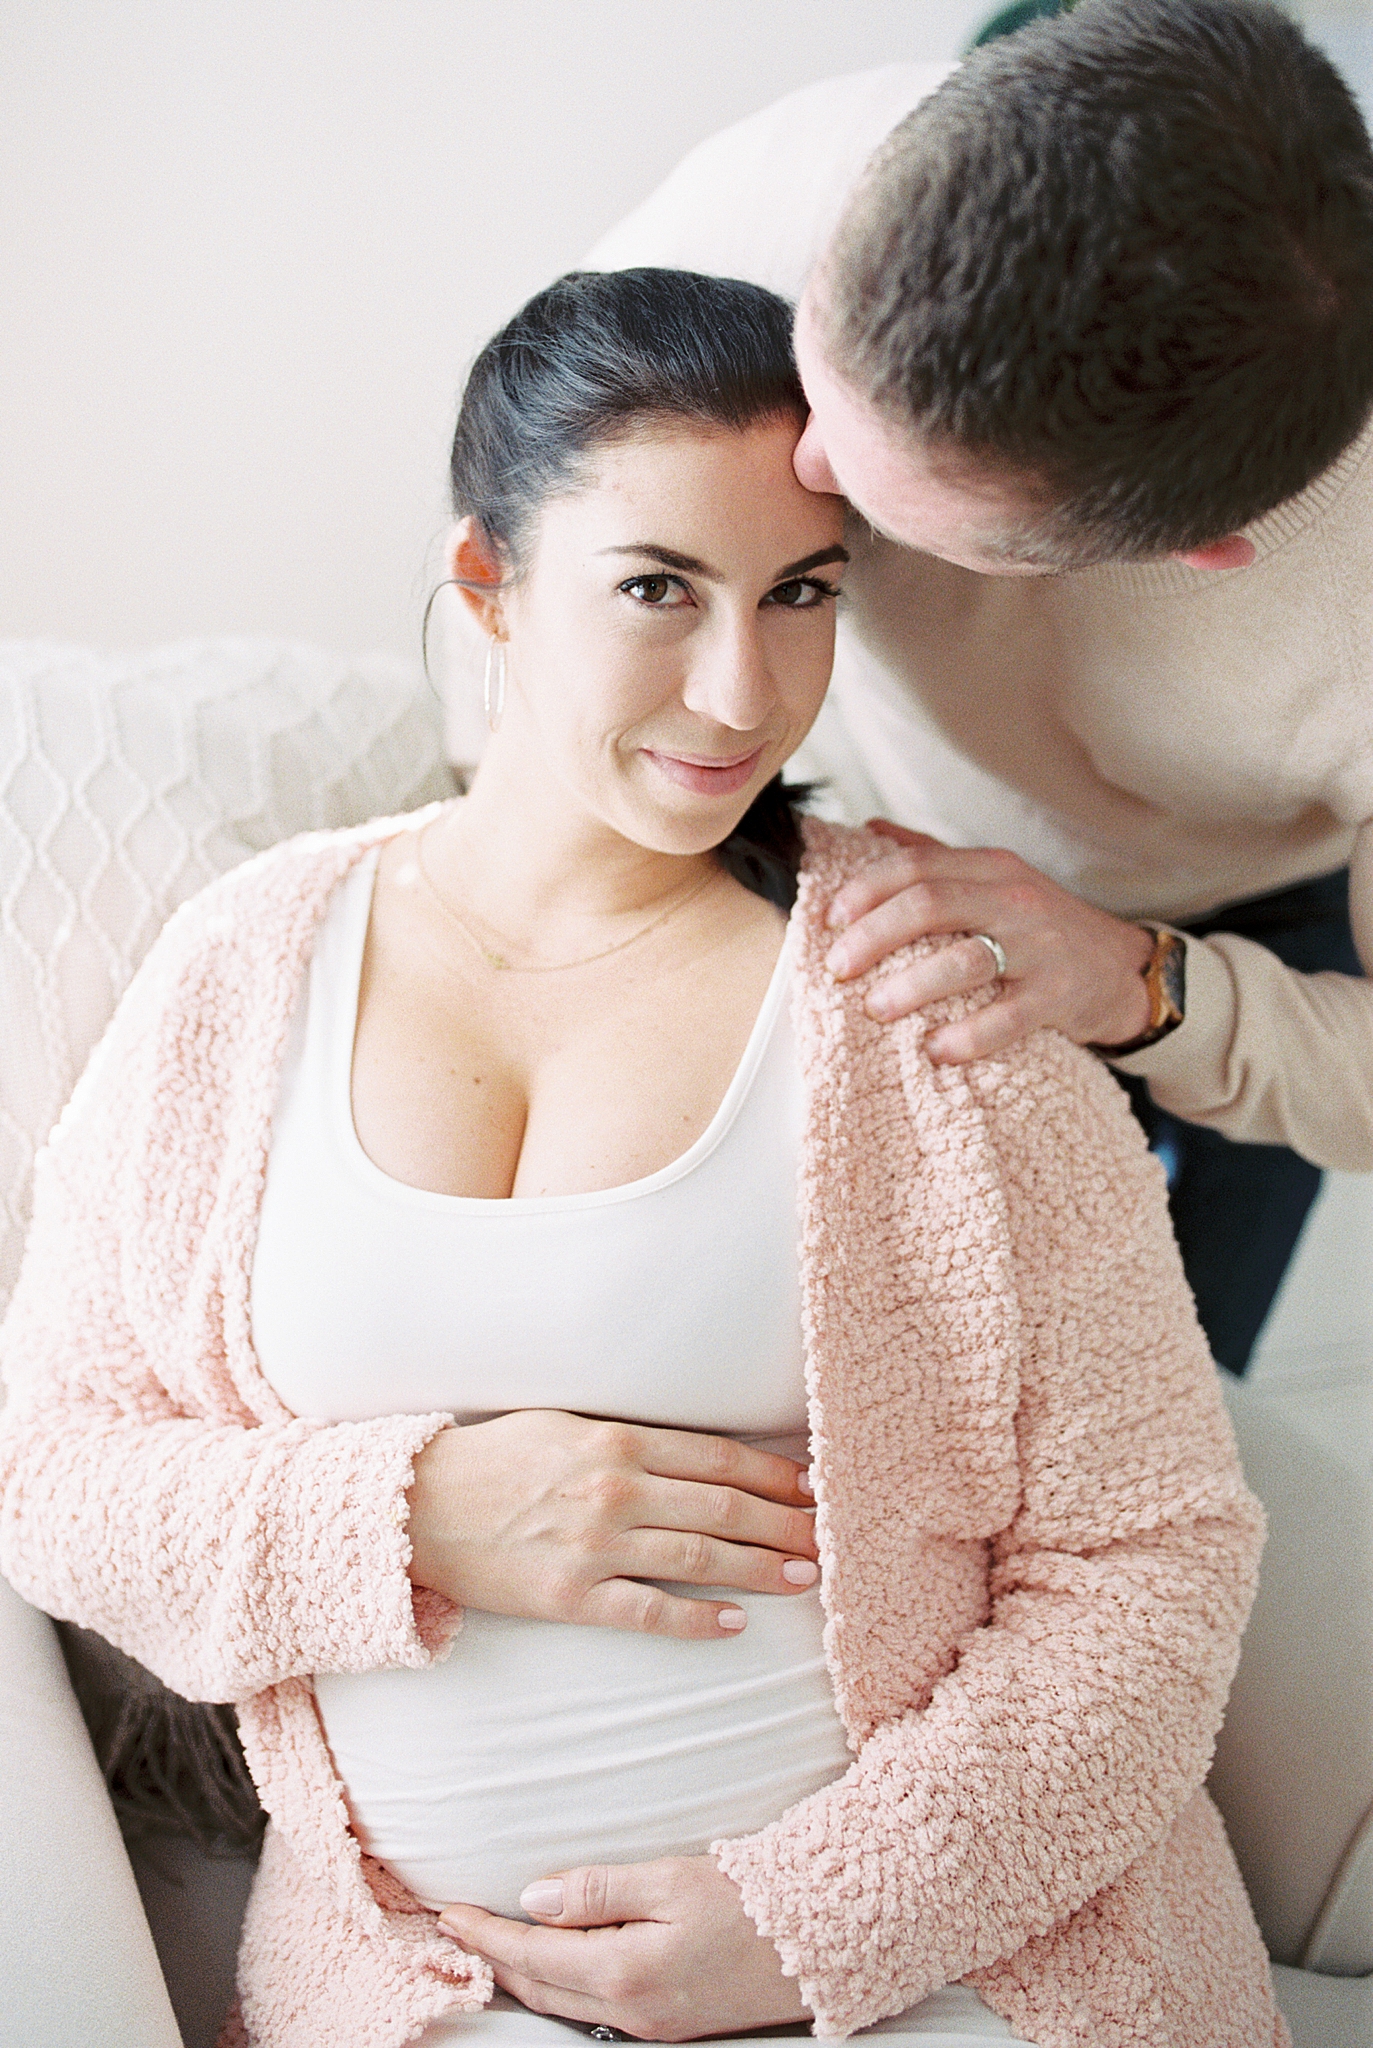 dad kisses mom's forehead during maternity photos at home